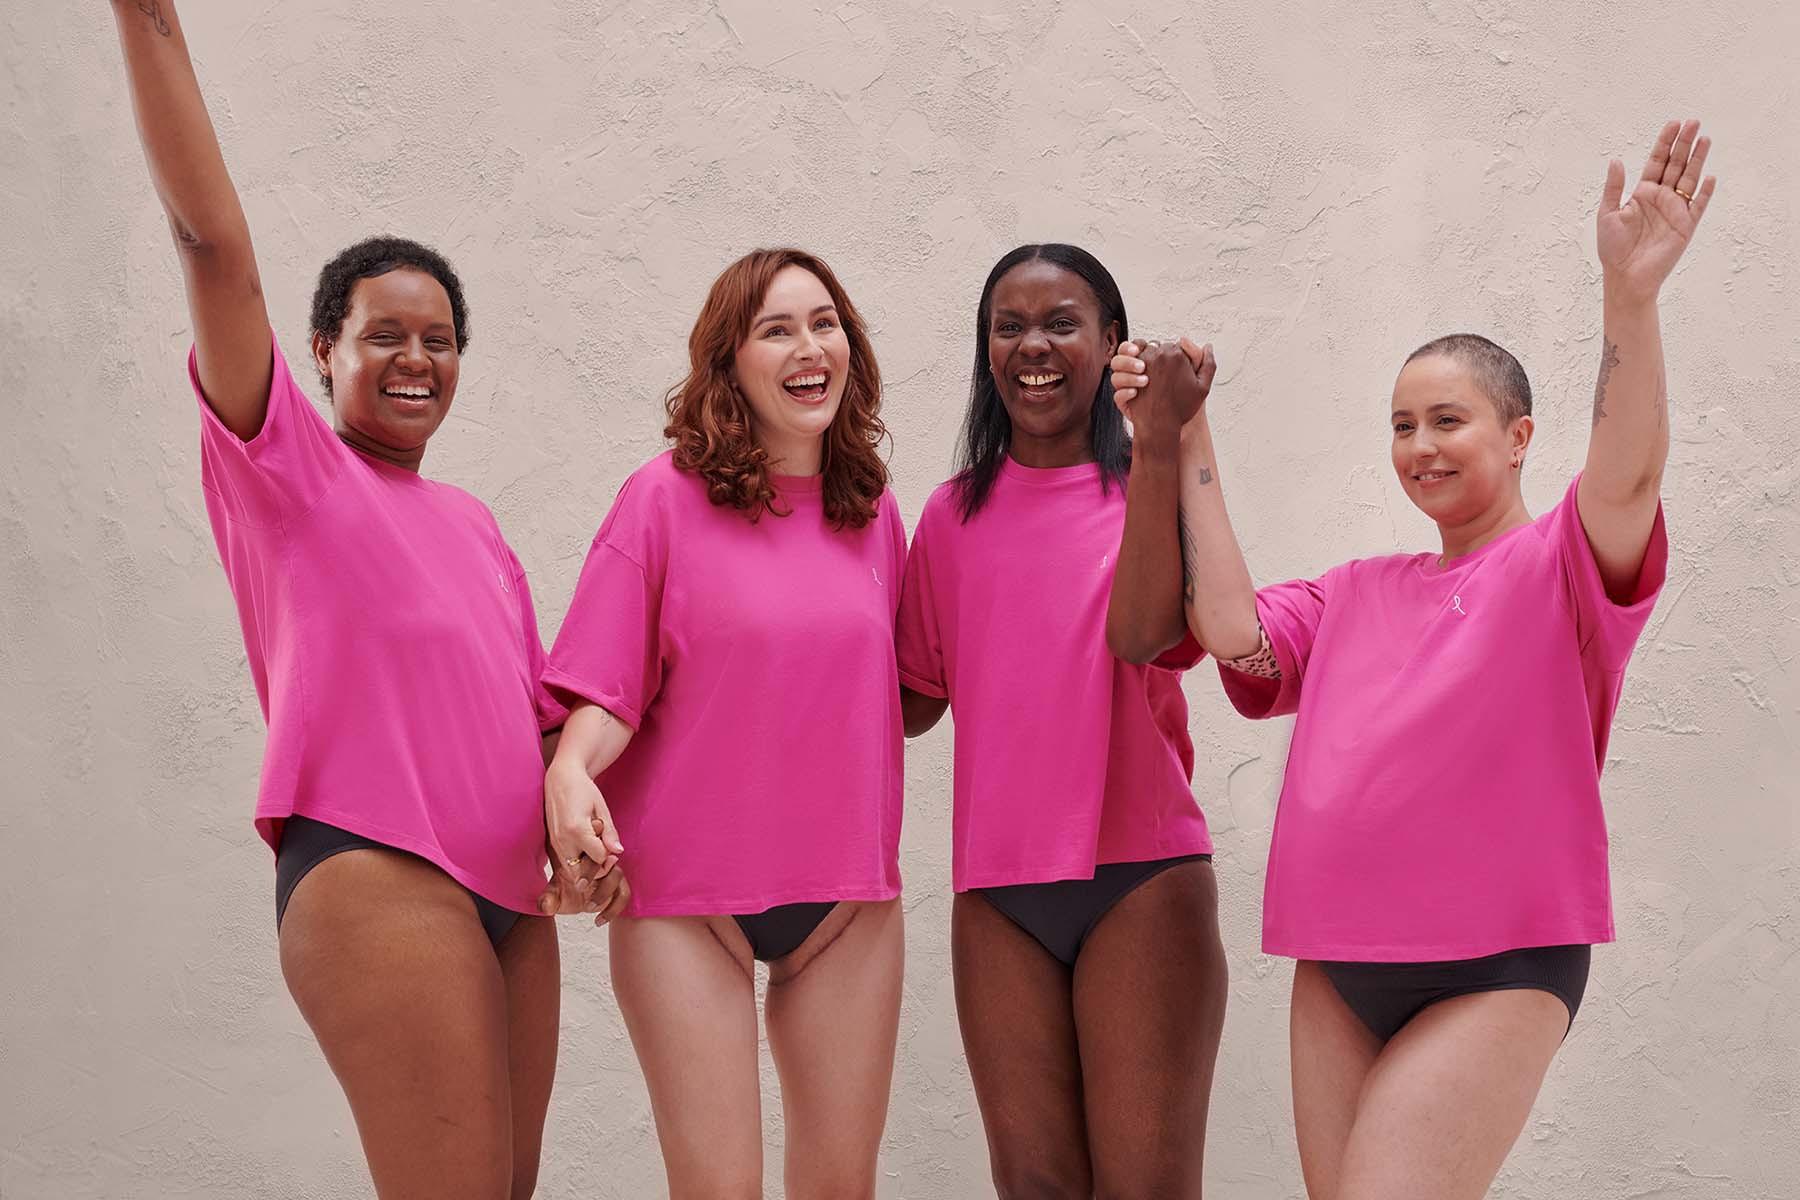 Primark launches breast cancer awareness campaign